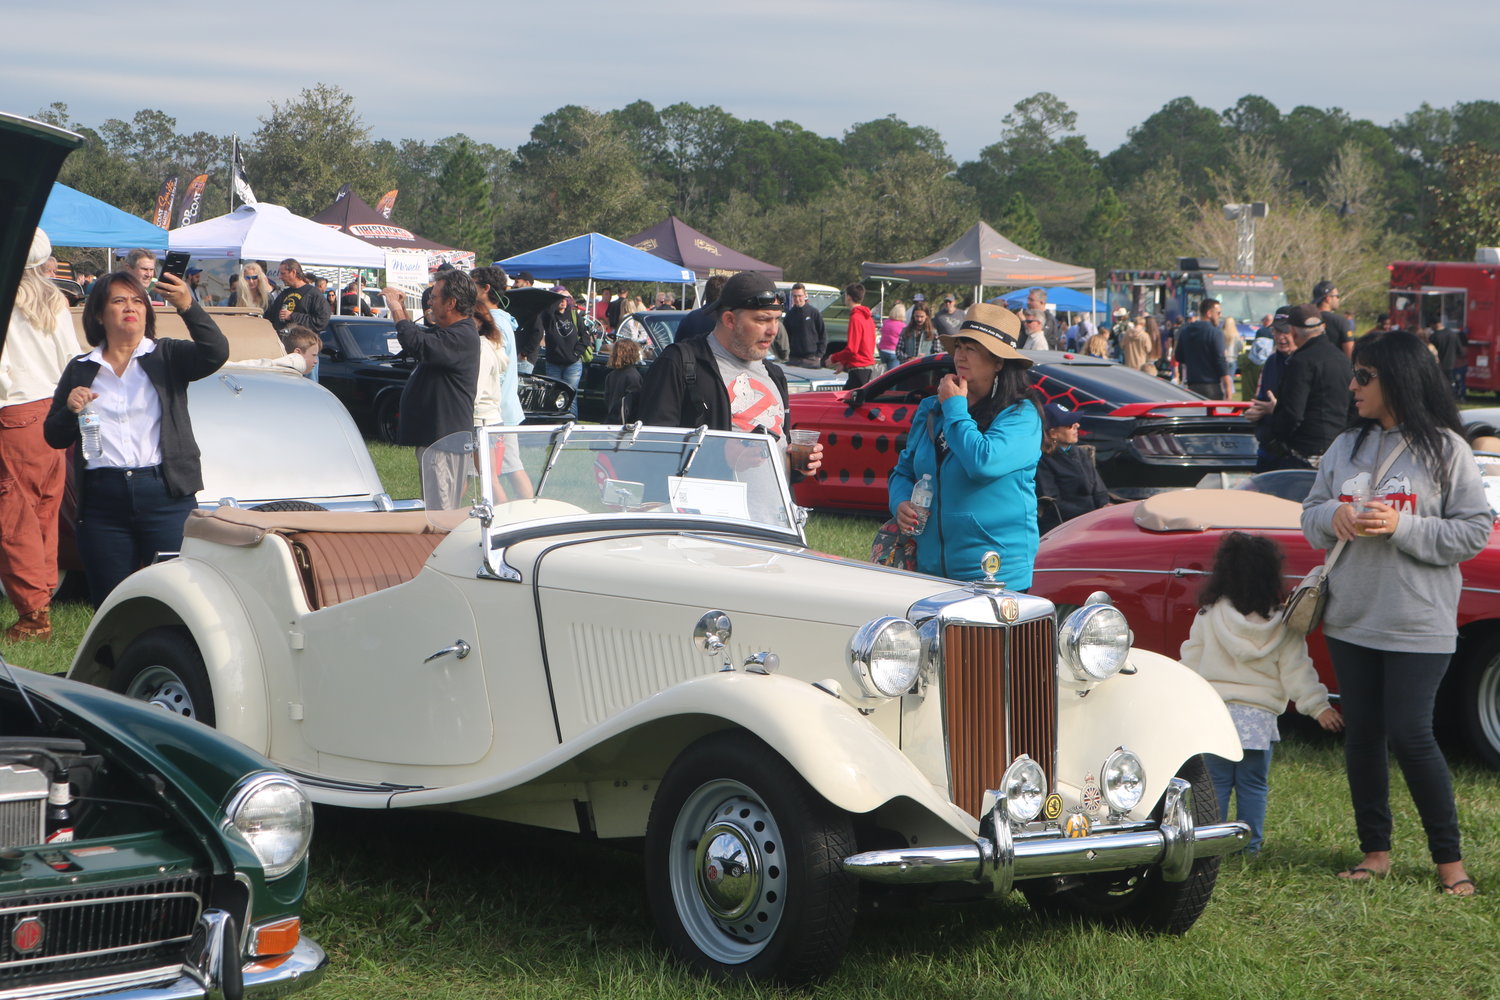 Roughly 175 cars filled Nocatee Station Field for the 20th Annual Ponte Vedra Auto Show.